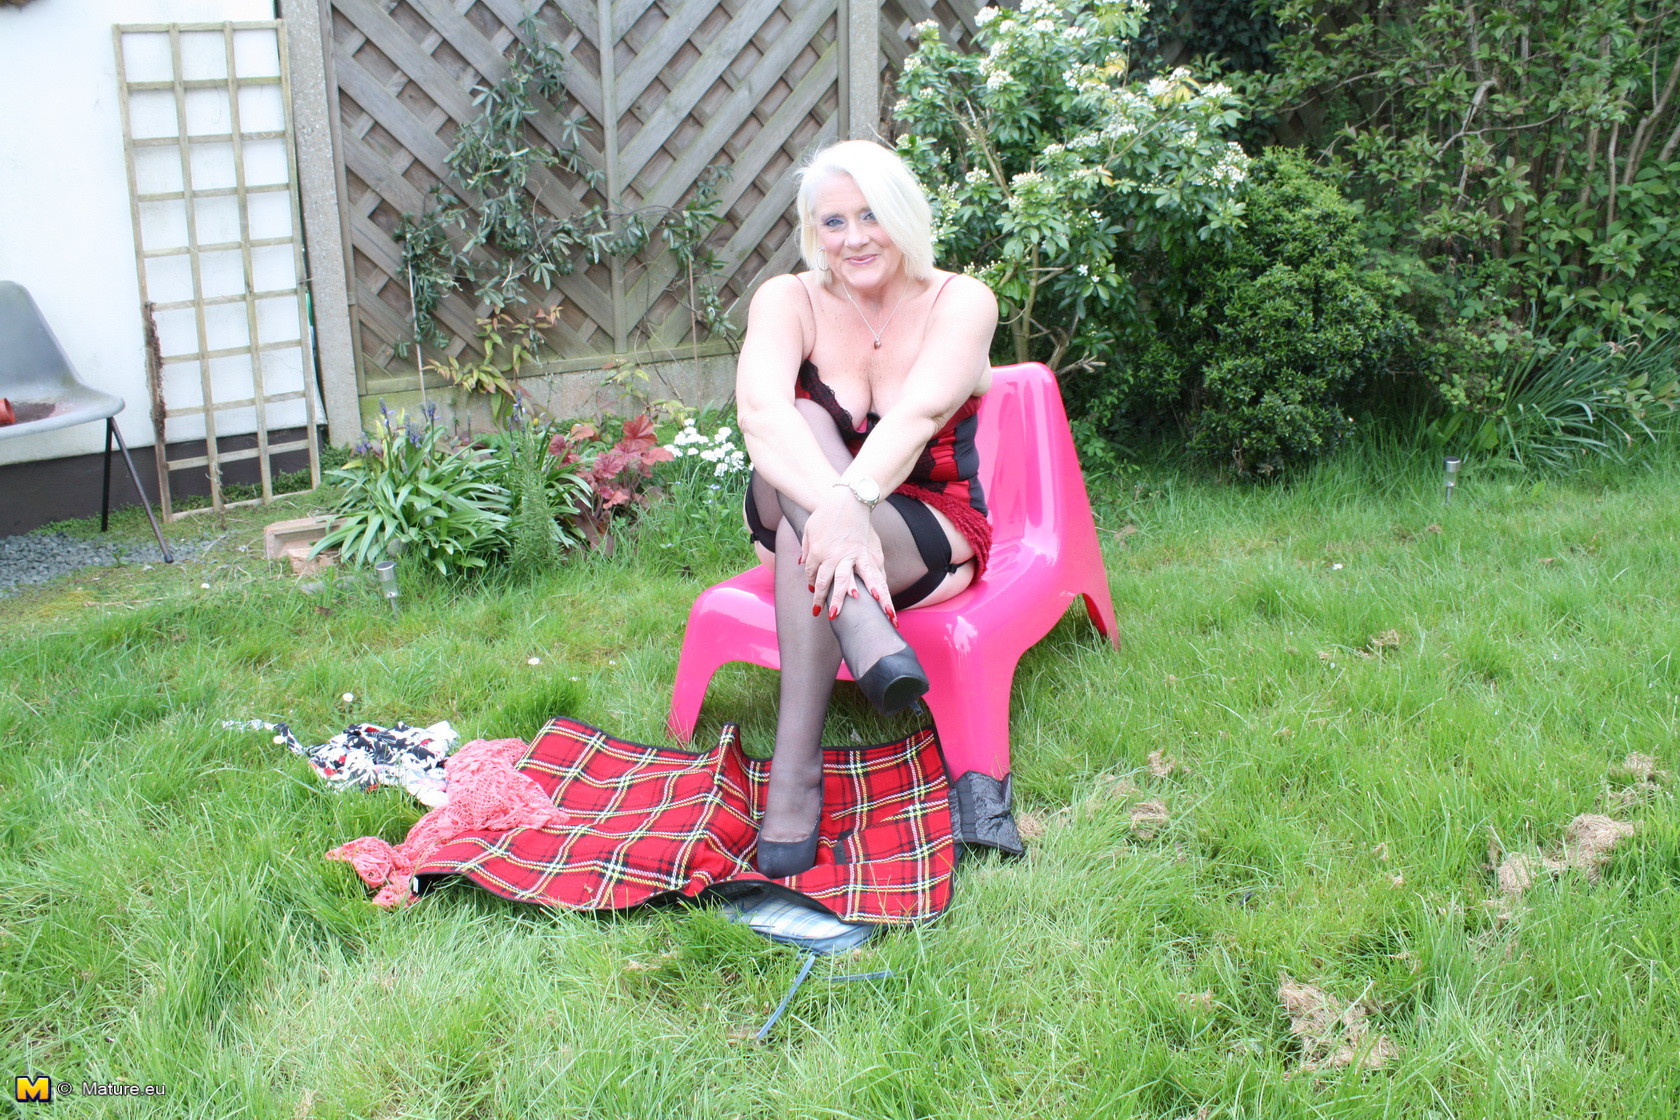 Naughty British housewife getting dirty in the garden #67430422